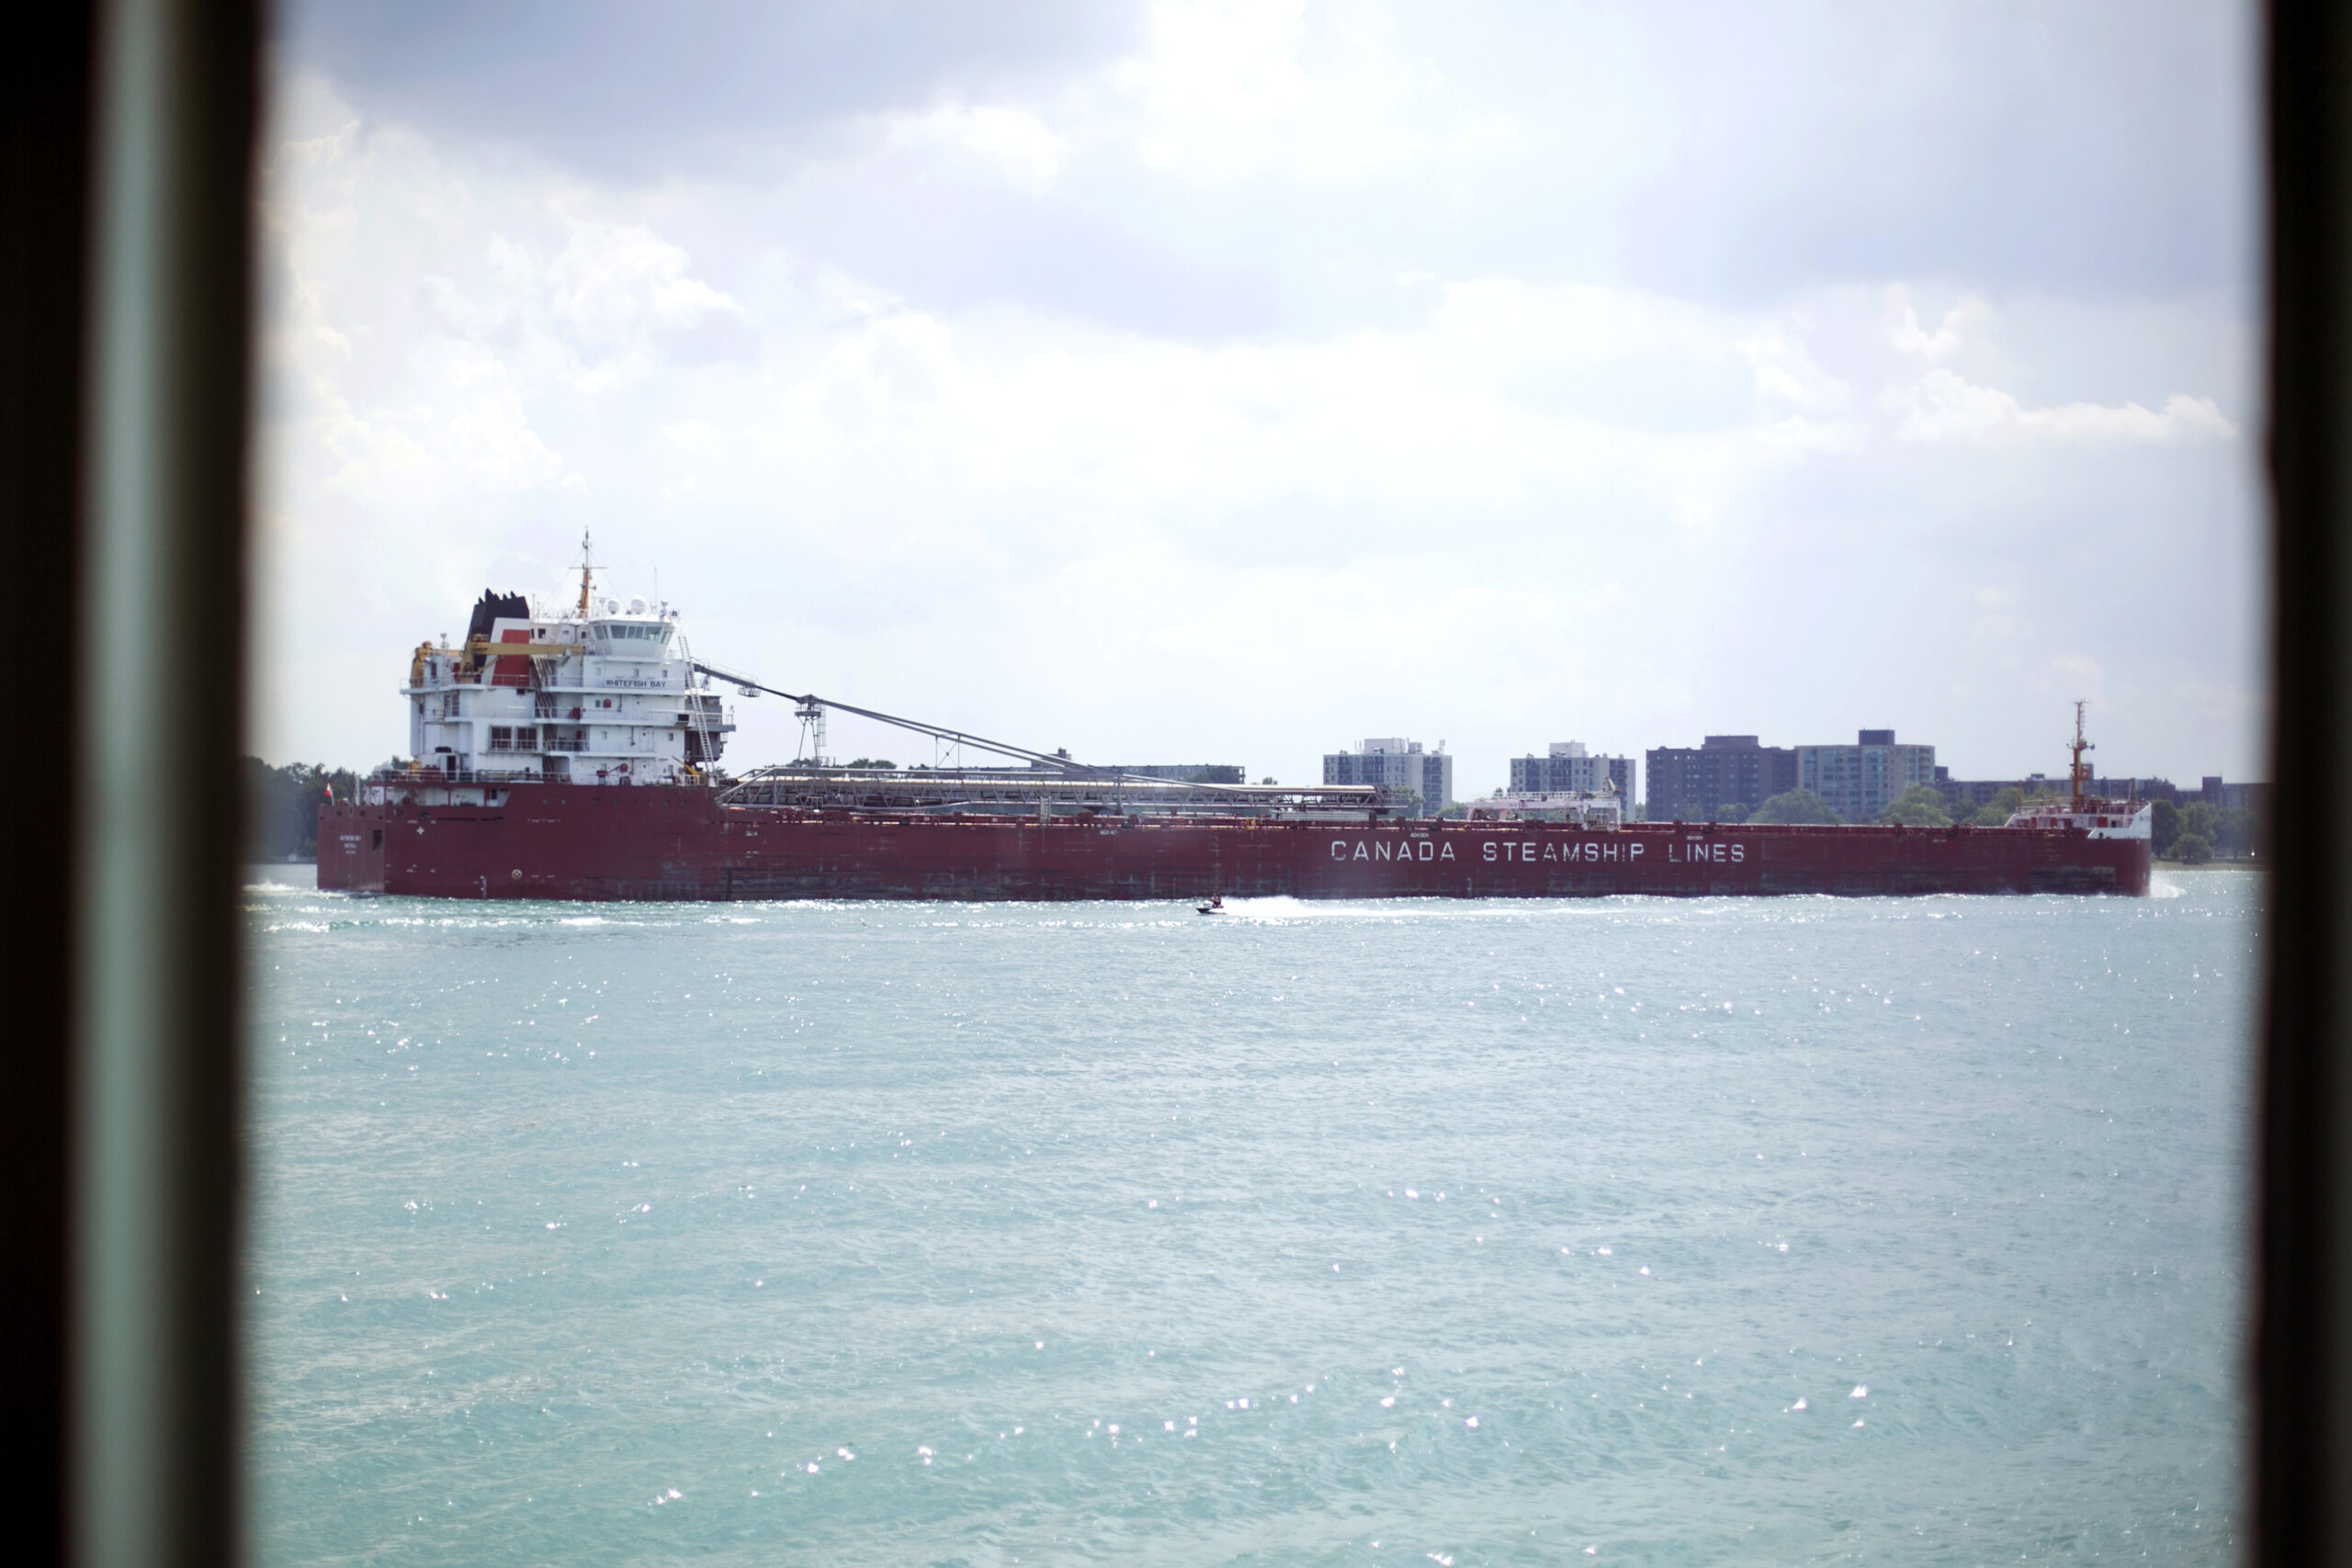 The Whitefish Bay, a 740-foot-long freighter